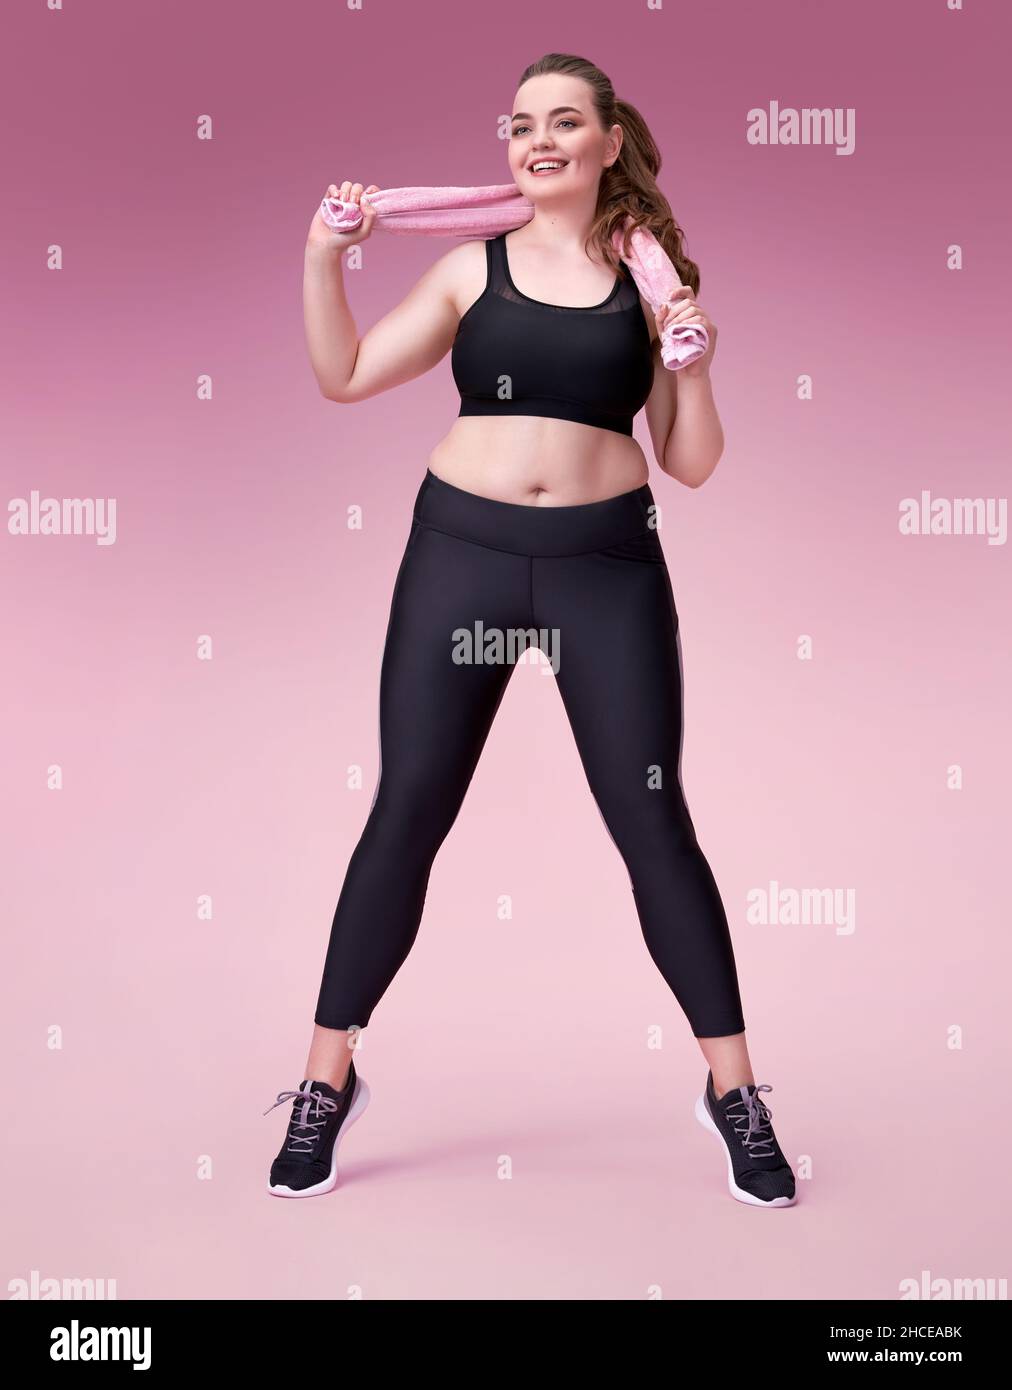 Sporty girl with towel after training. Photo of model with curvy figure in fashionable sportswear on pink background. Sports motivation and healthy li Stock Photo